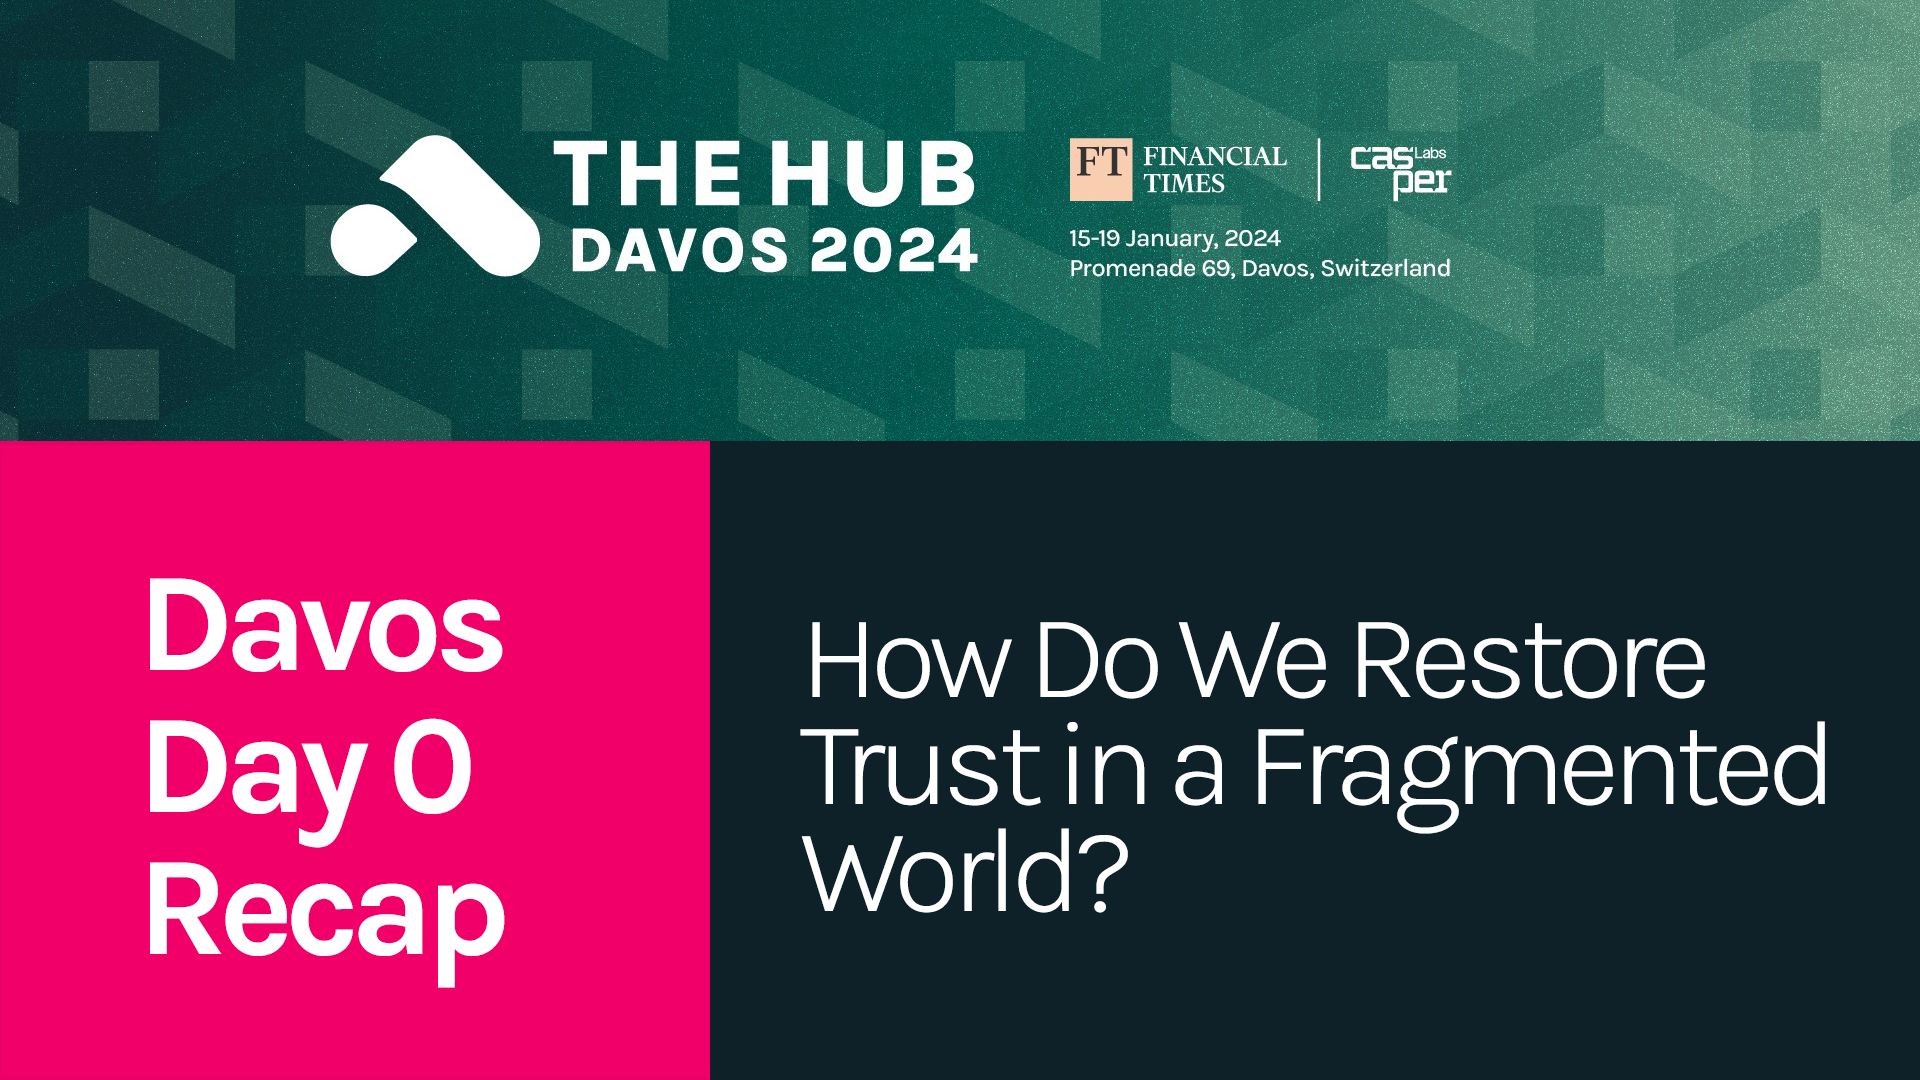 How Do We Restore Trust in a Fragmented World? | Davos Daily Recap